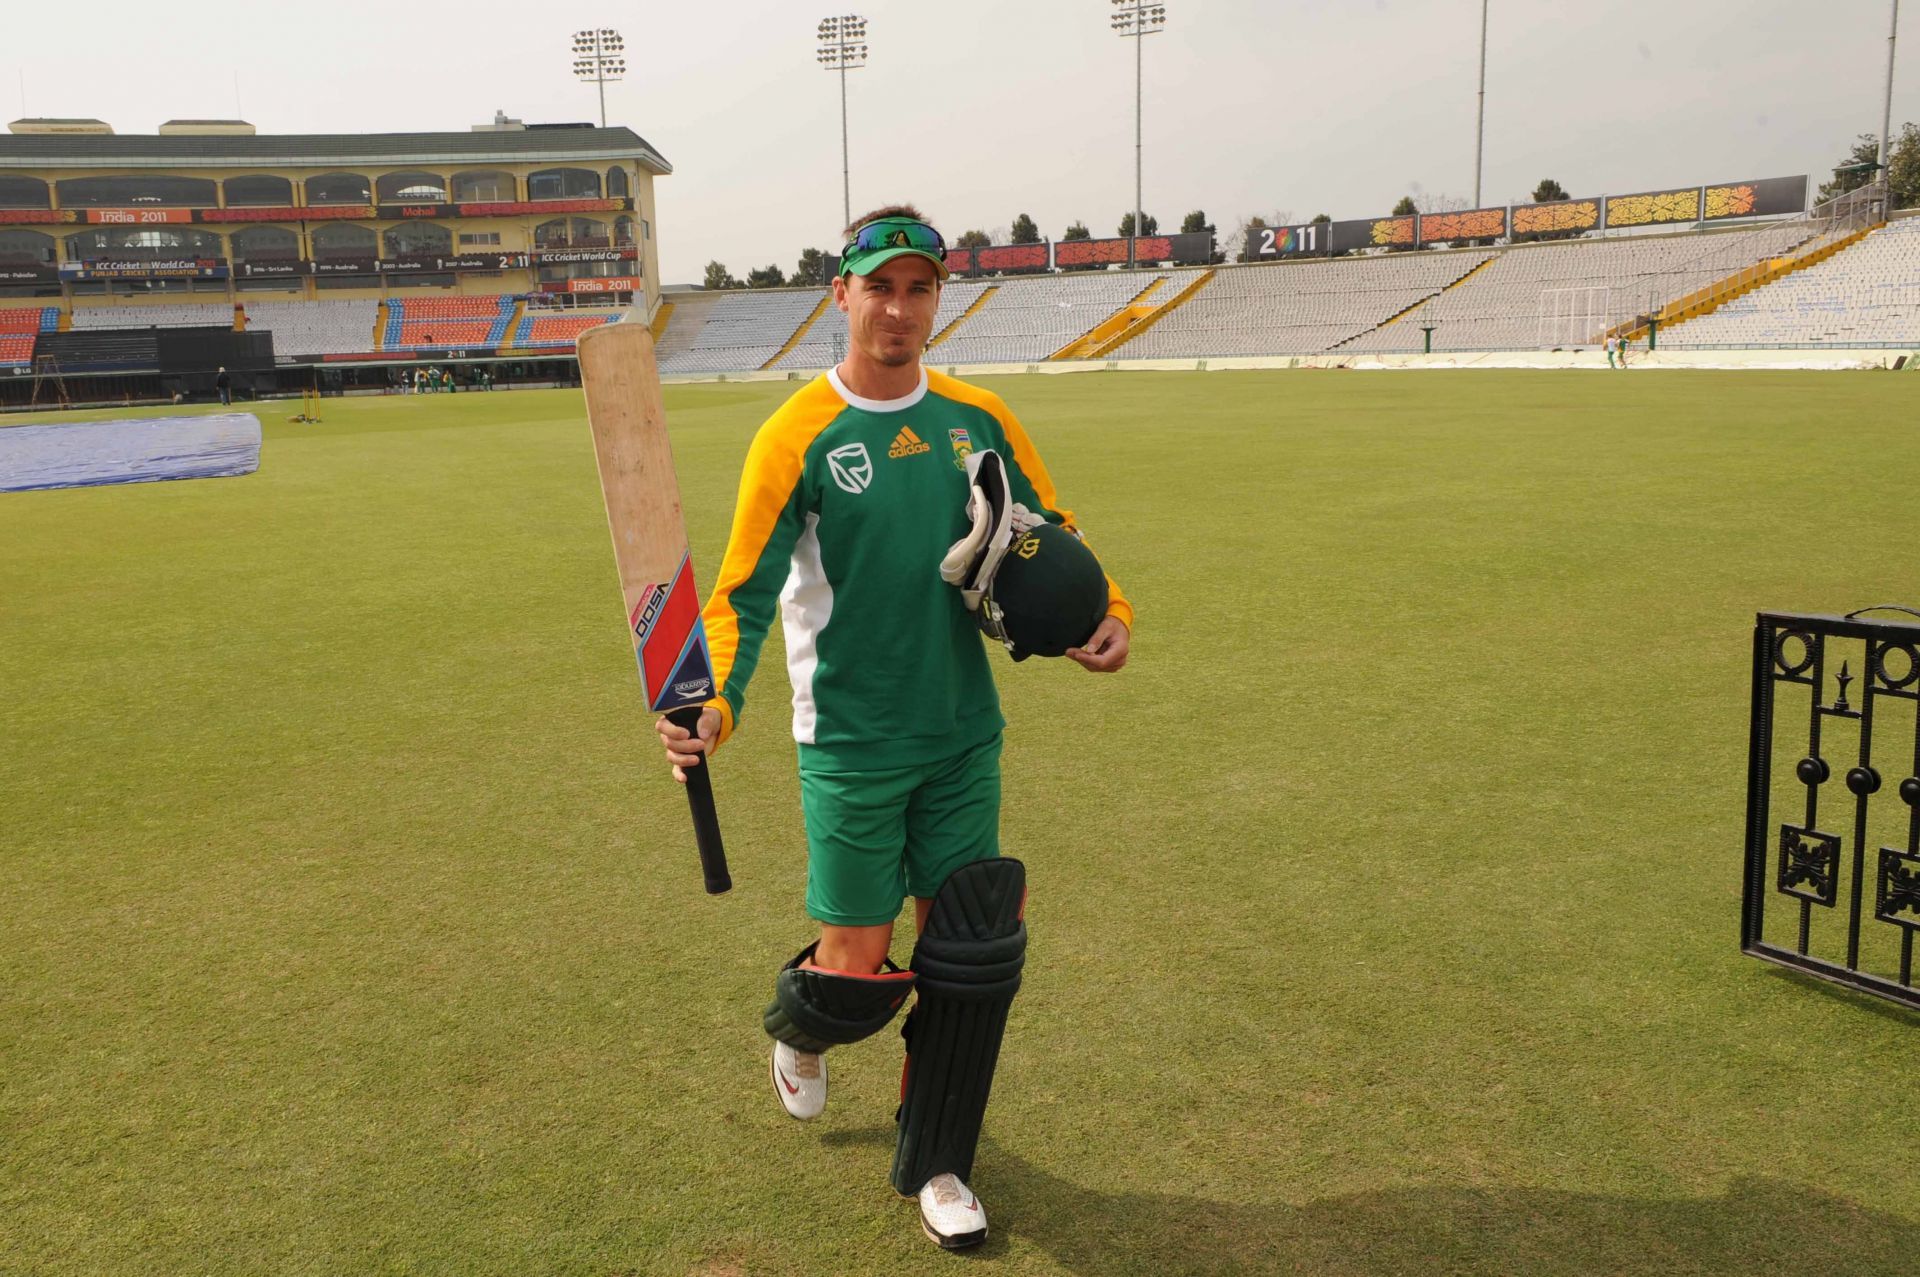 Dale Steyn led the South African pace attack in the 2011 World Cup